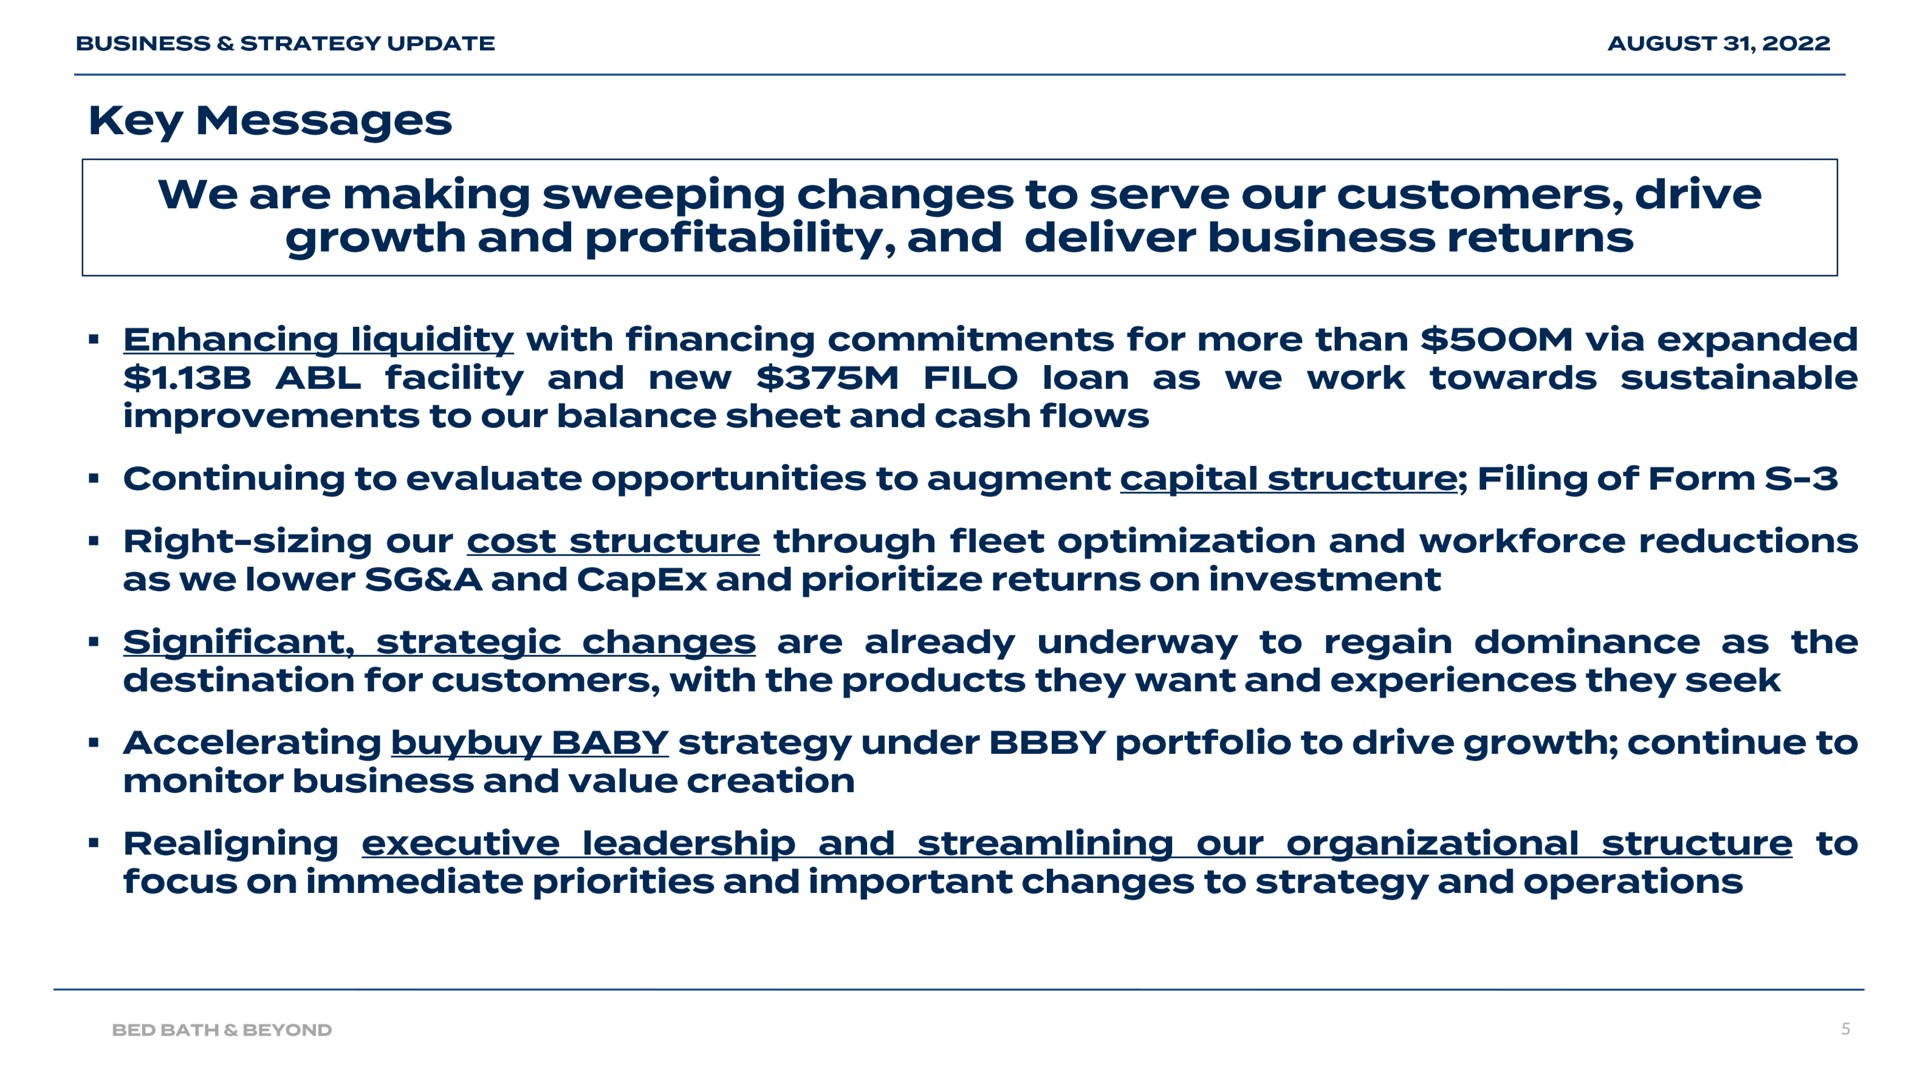 we are making sweeping changes to serve our customers drive growth and profitability and deliver business returns | Bed Bath & Beyond